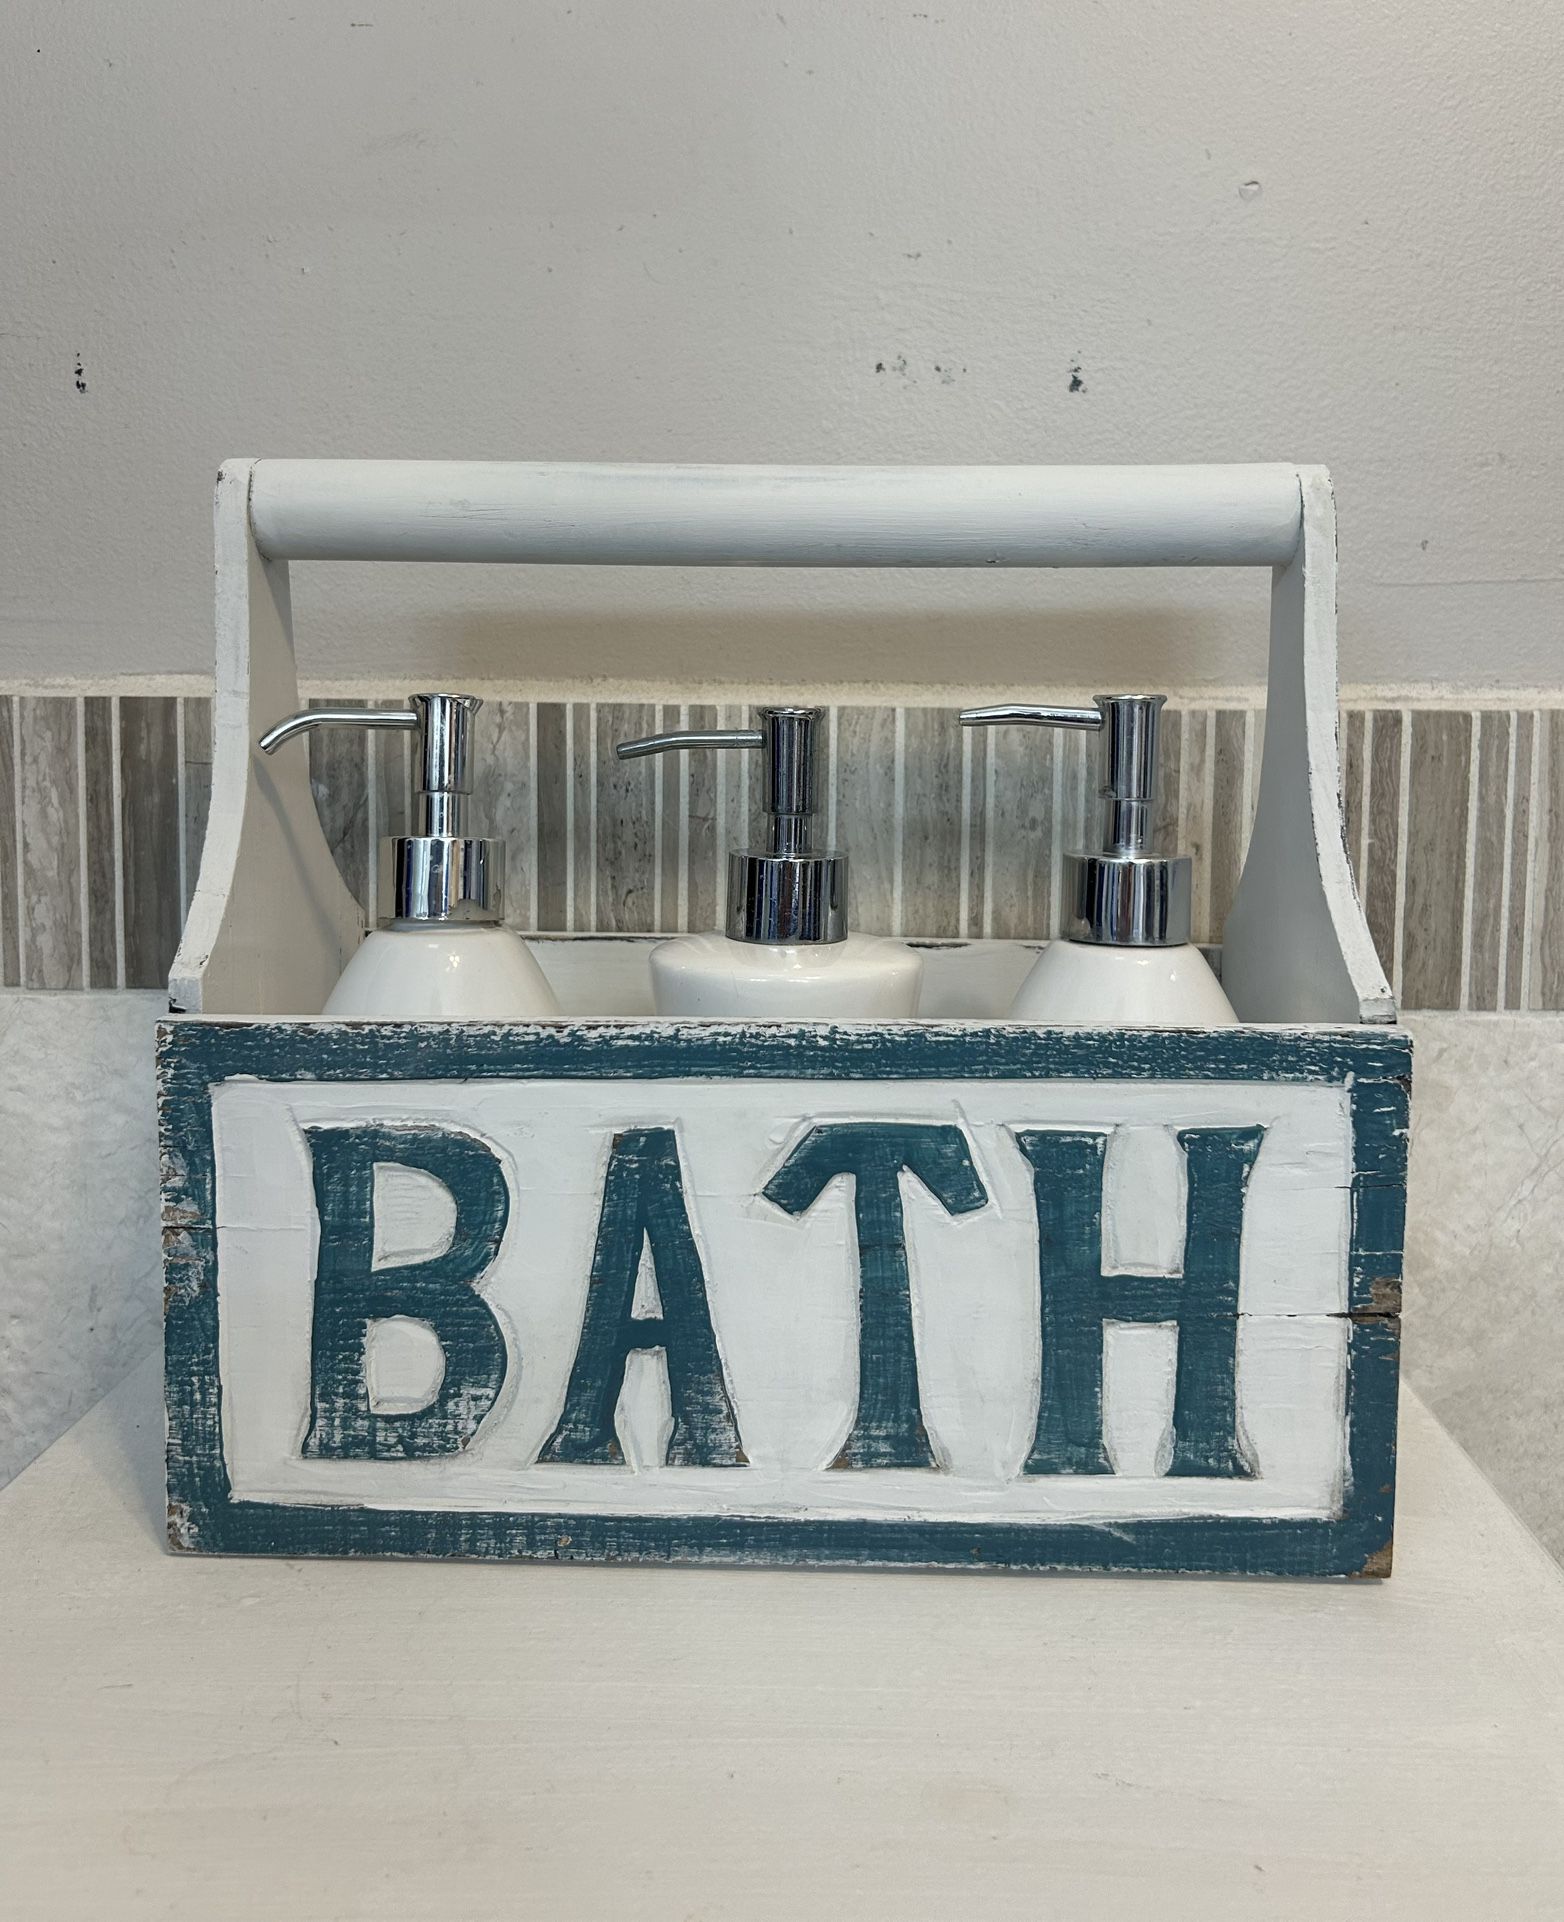 Fabulous Green And White Distressed Tool Box For The Bath…. So Cute. 18 X11